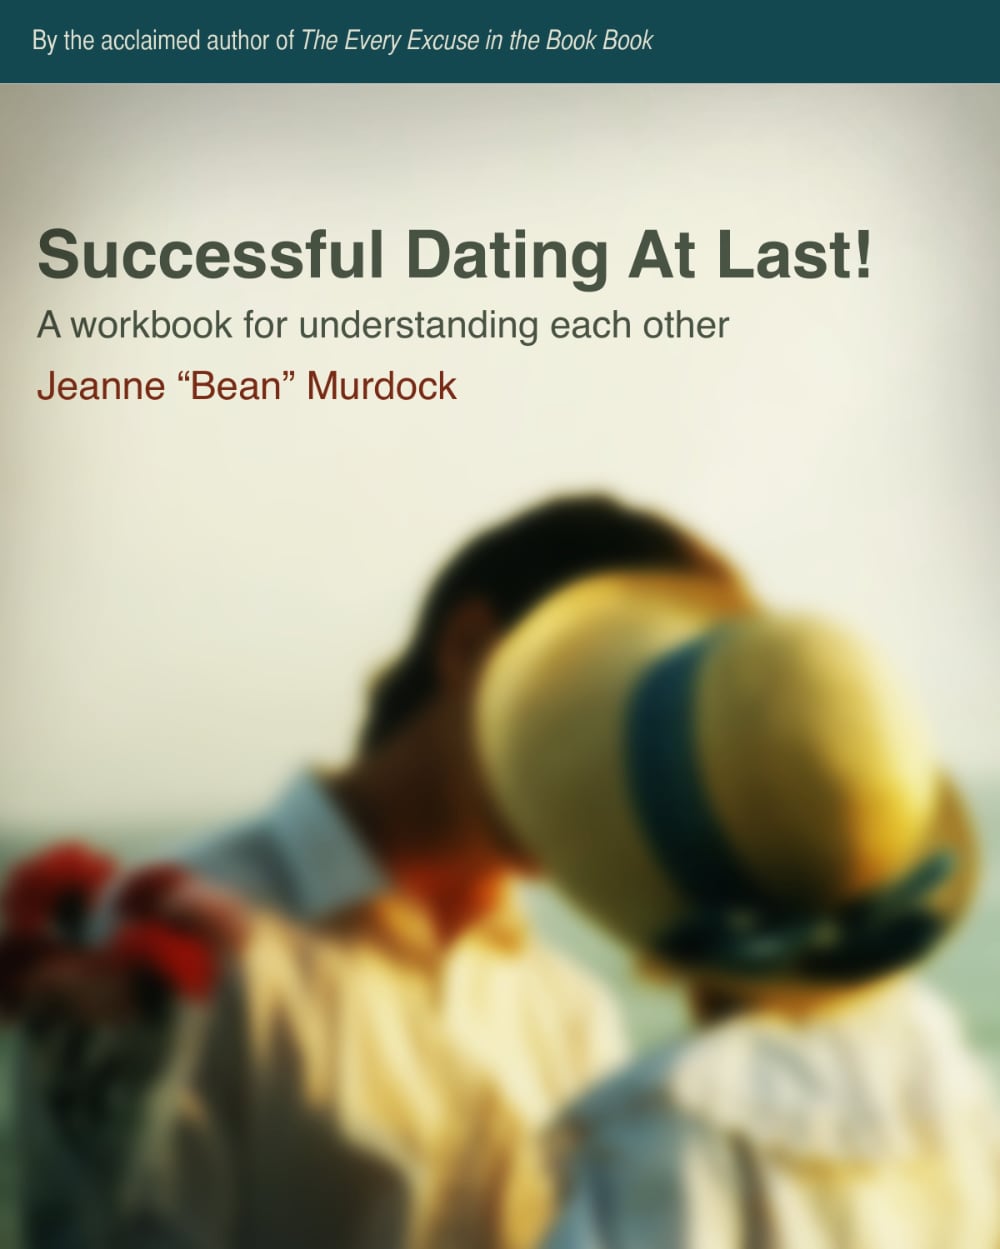 Successful Dating At Last!<br /> A Workbook for Understanding Each Other